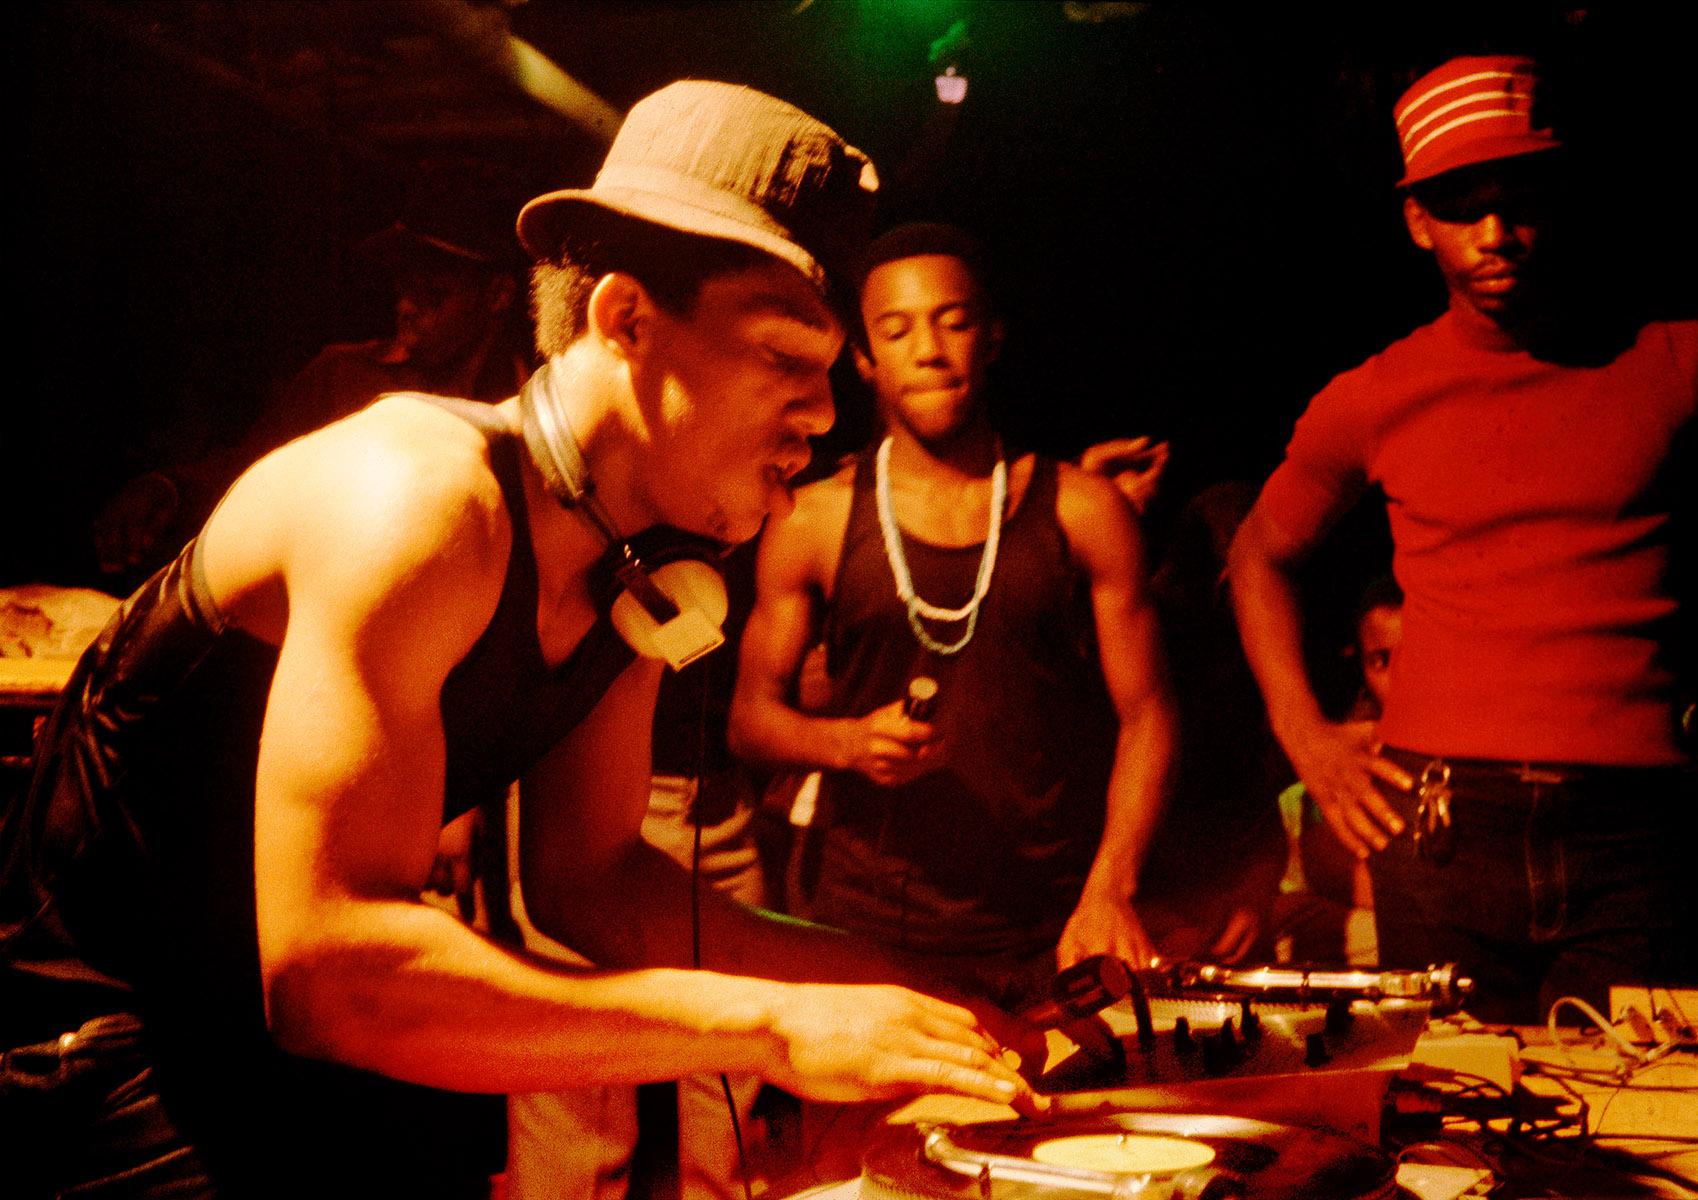 DJ Lovebug, Grandmaster Caz, Busy Bee at the Celebrity Club: Harlem, New York, 1980 by Charlie Ahearn, director of Wild Style (1982):
A seminal early Hip Hop photograph featured as part of the exhibition: New York, New Music 1980-86: Museum of the